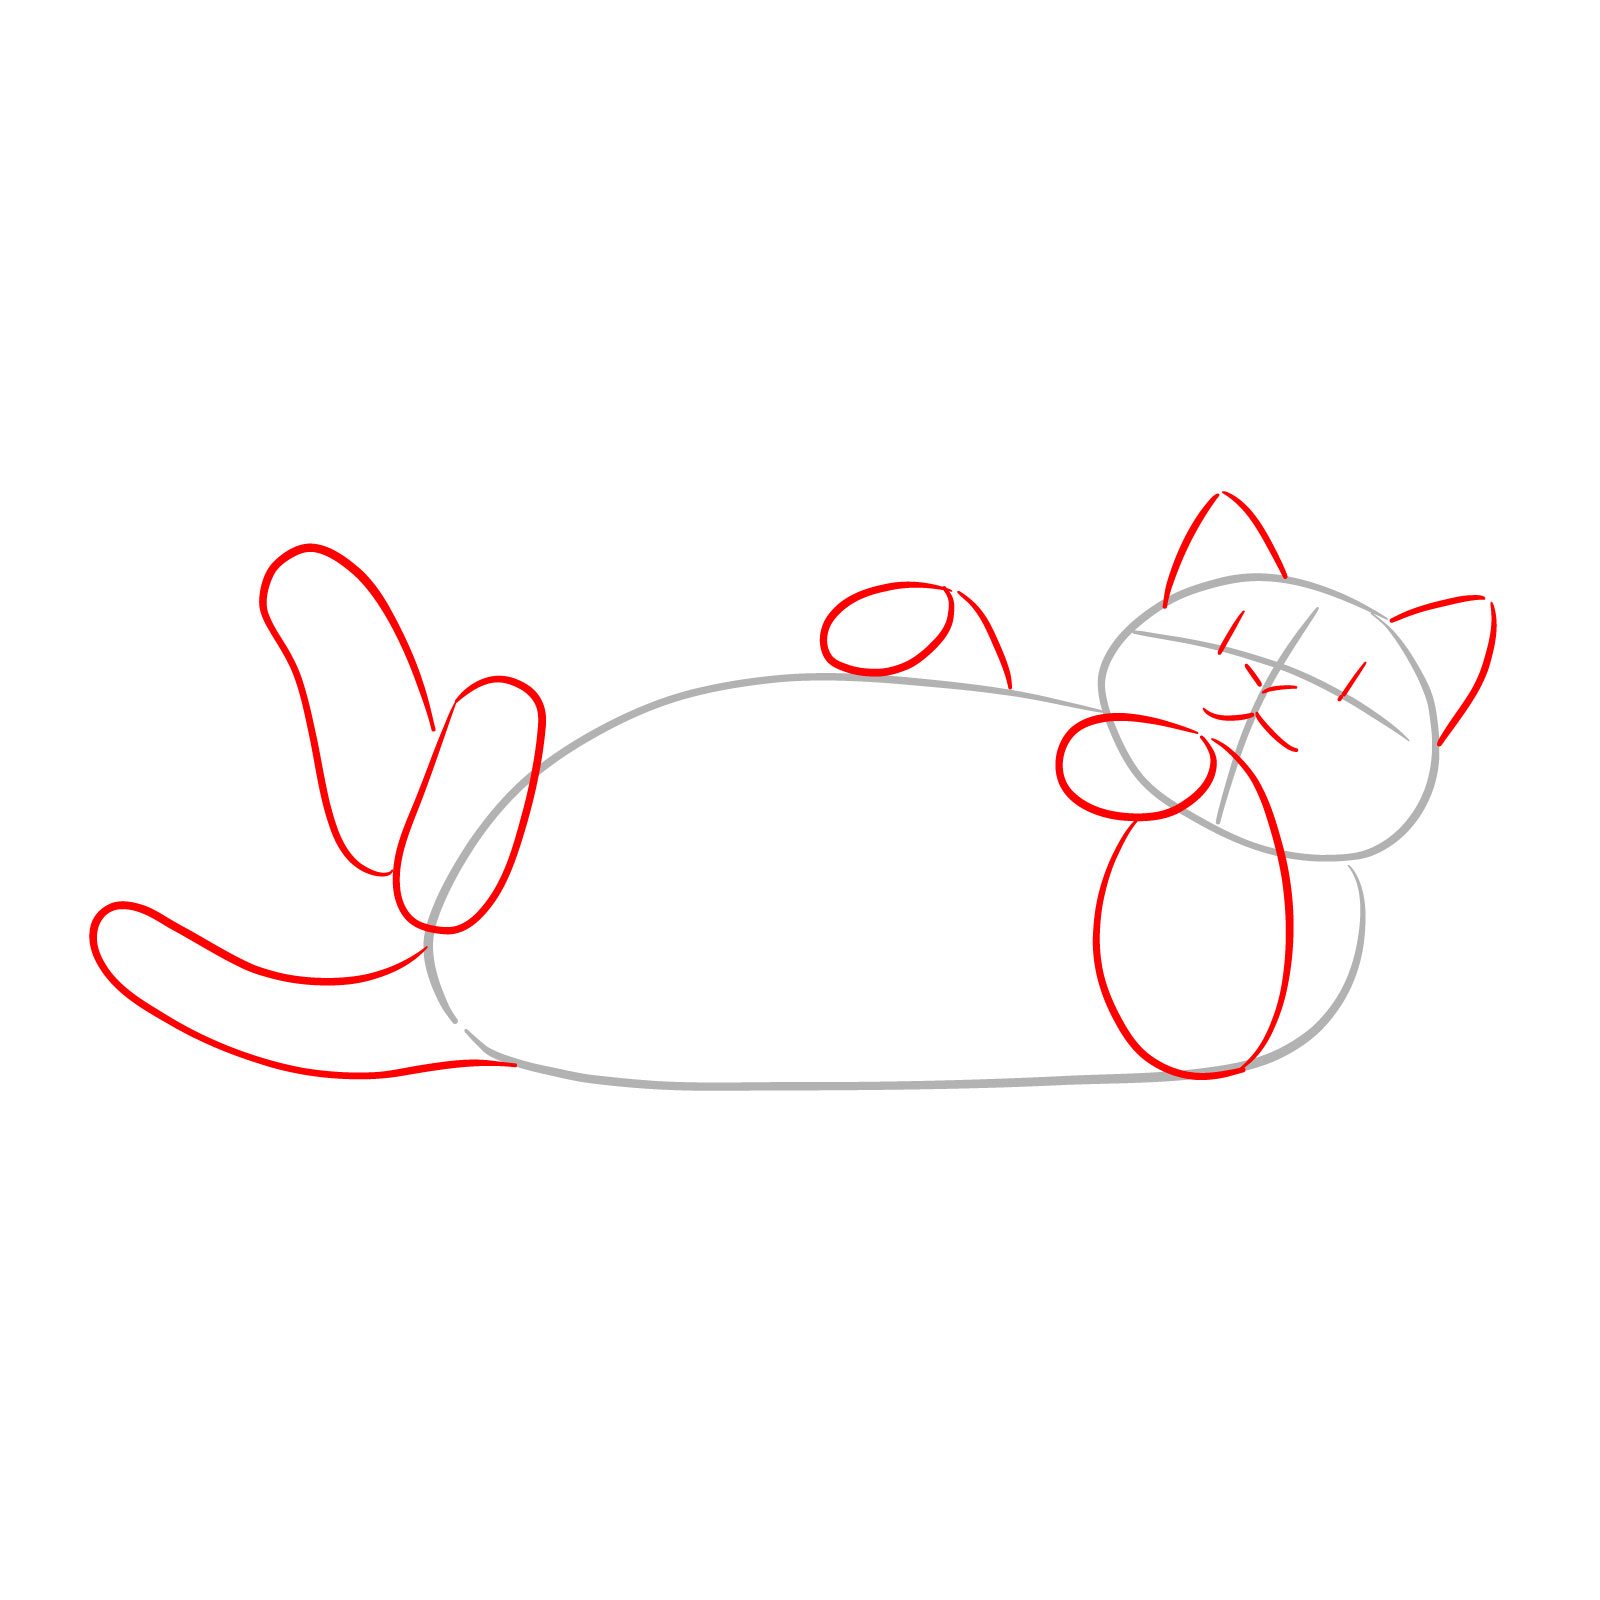 Basic outline of a cat's features including ears, eyes, nose, mouth, limbs, and tail - step 02